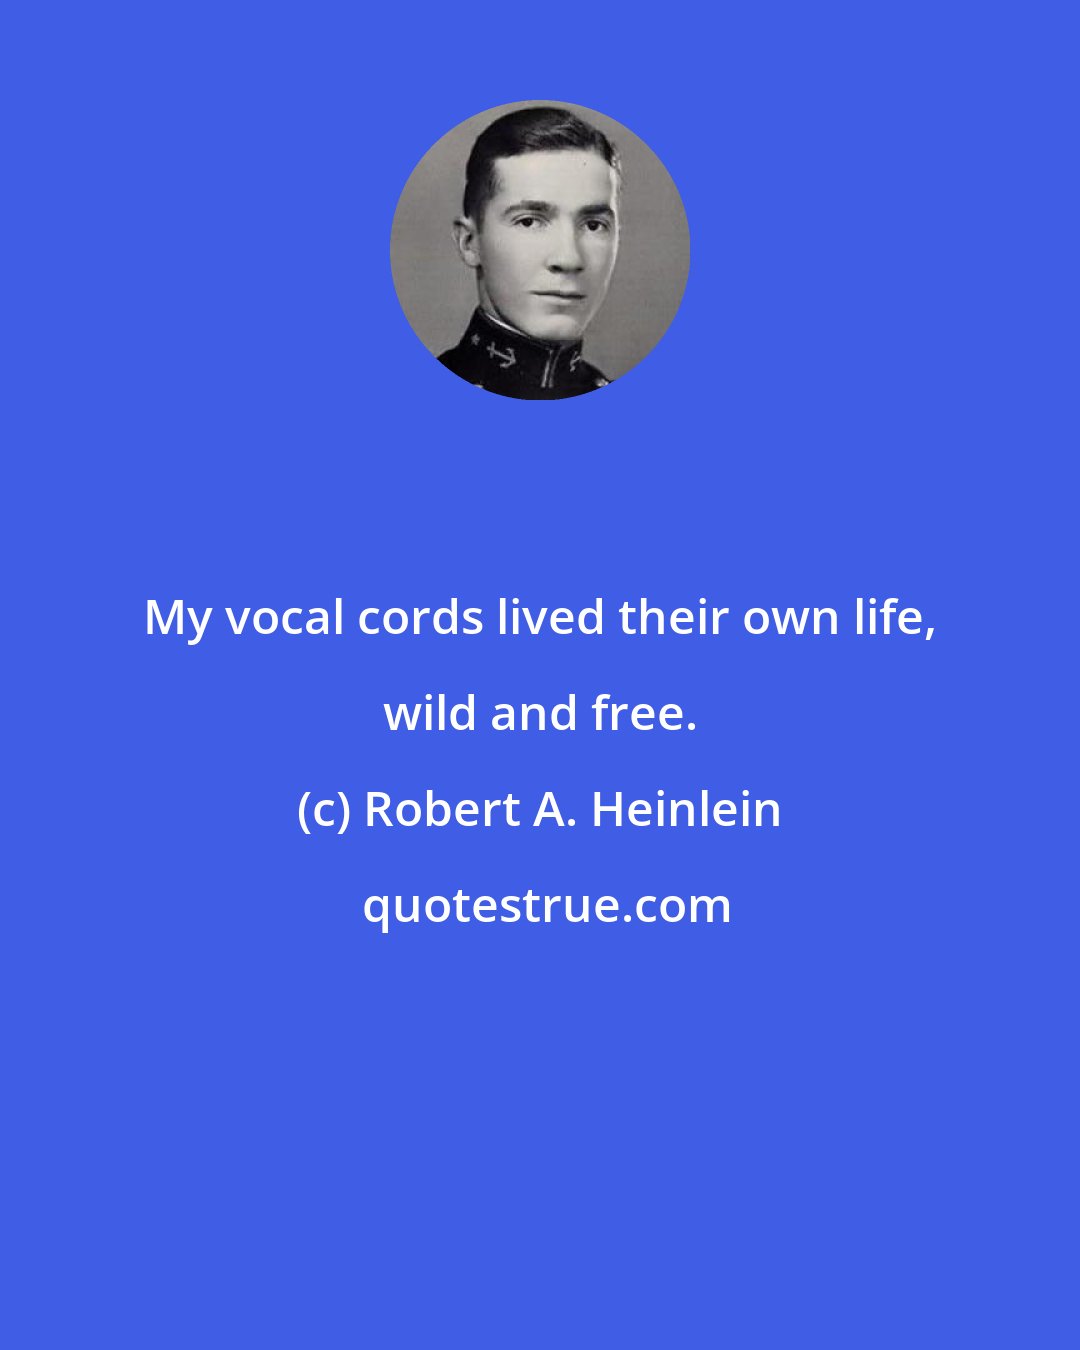 Robert A. Heinlein: My vocal cords lived their own life, wild and free.